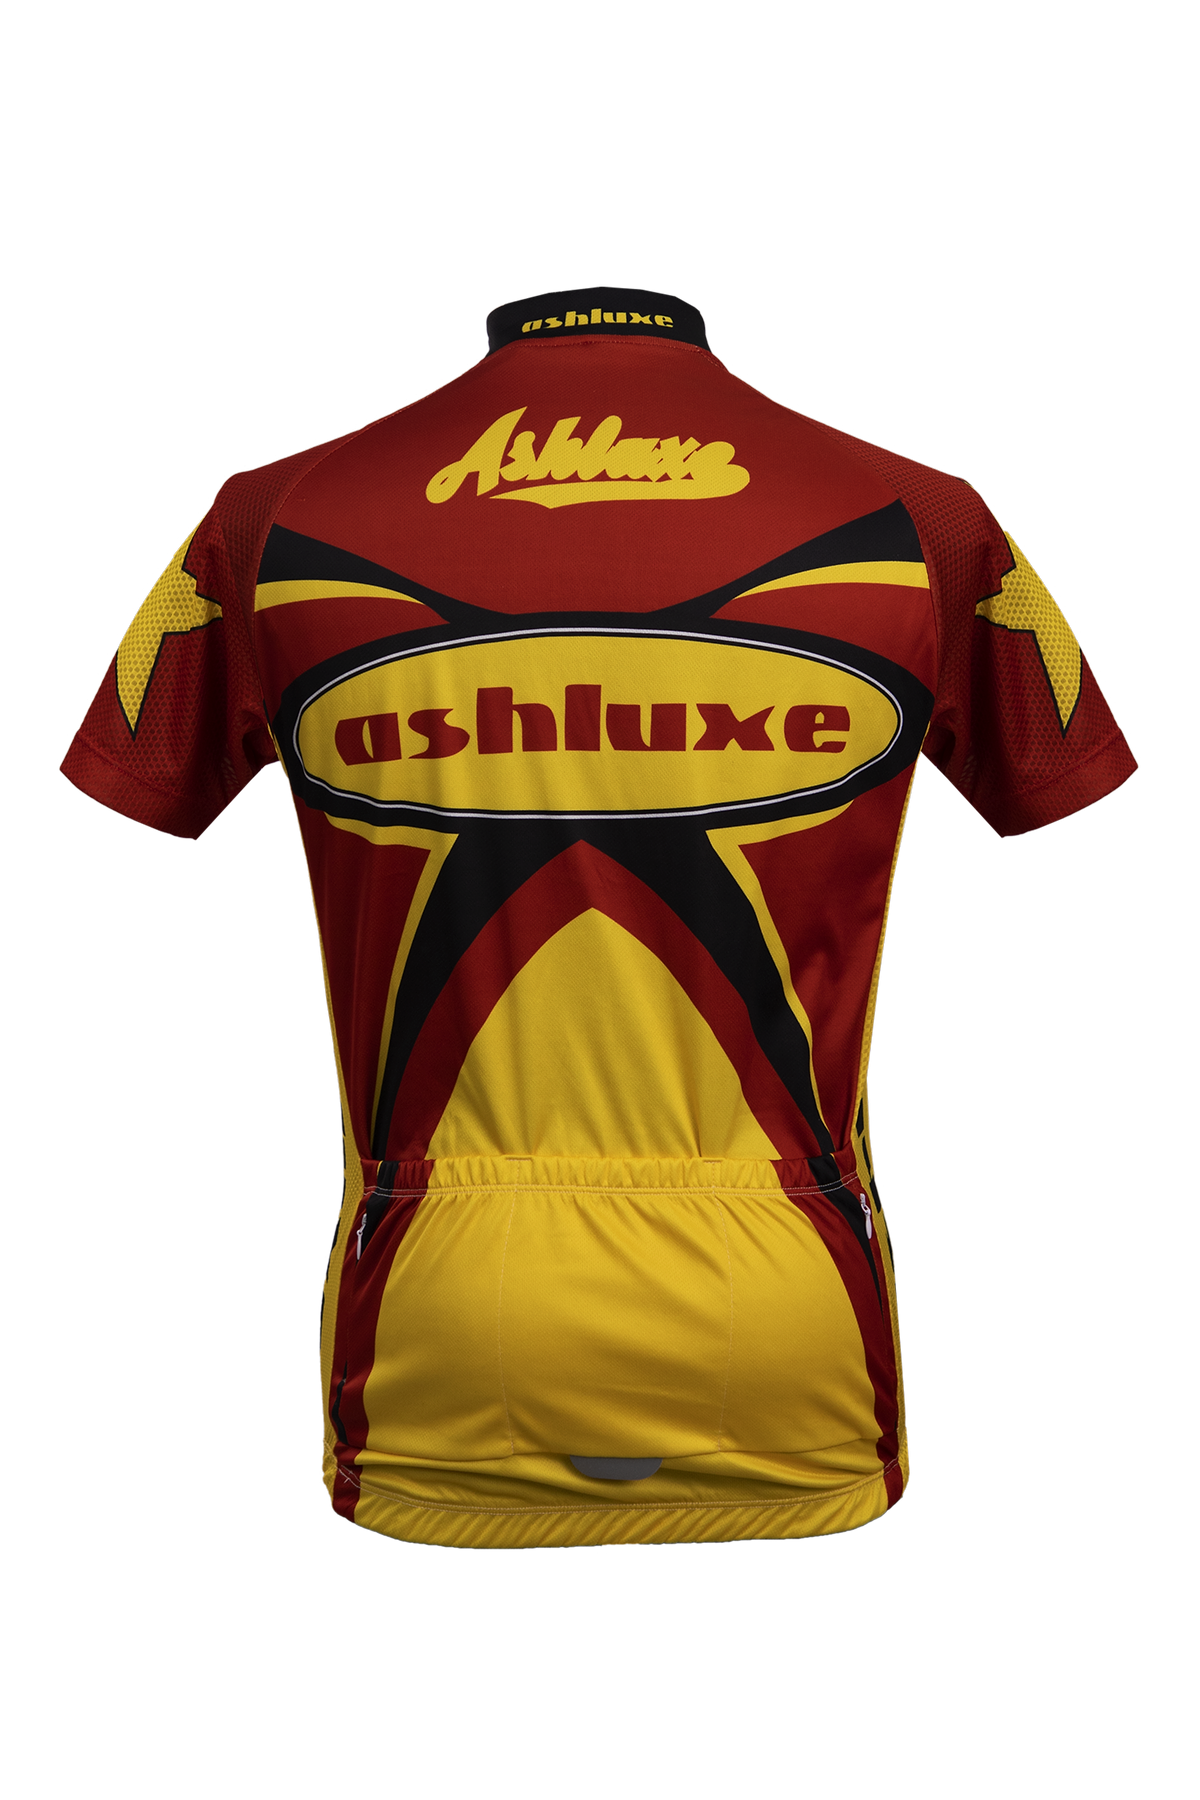 ASHLUXE Cycling Jersey - Red